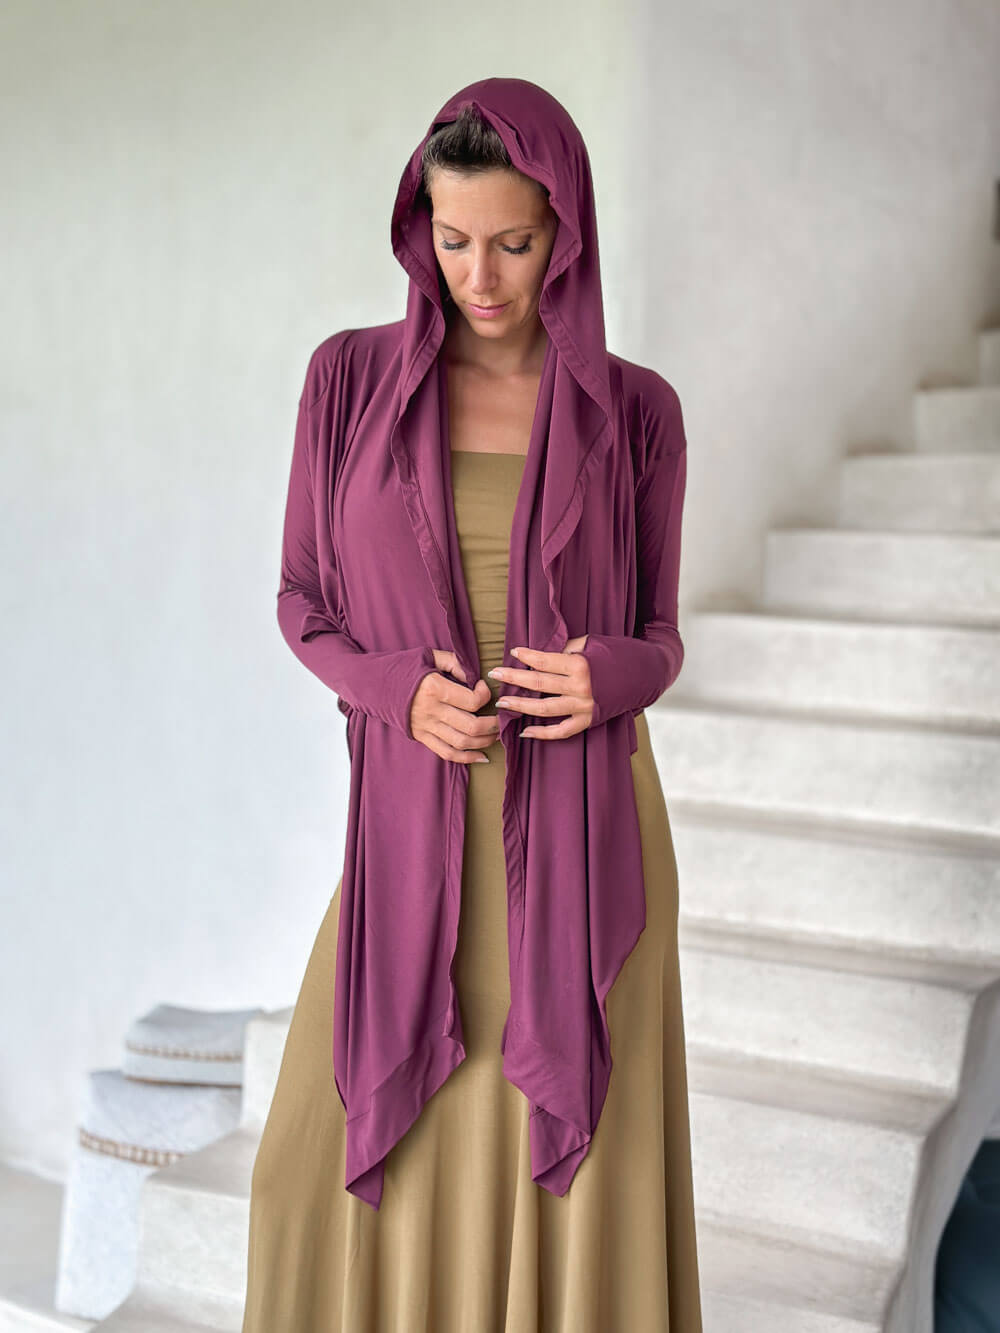 women's plant-based rayon jersey versatile purple long sleeve convertible wrap jacket with thumbholes that can be worn 2 ways #color_jam